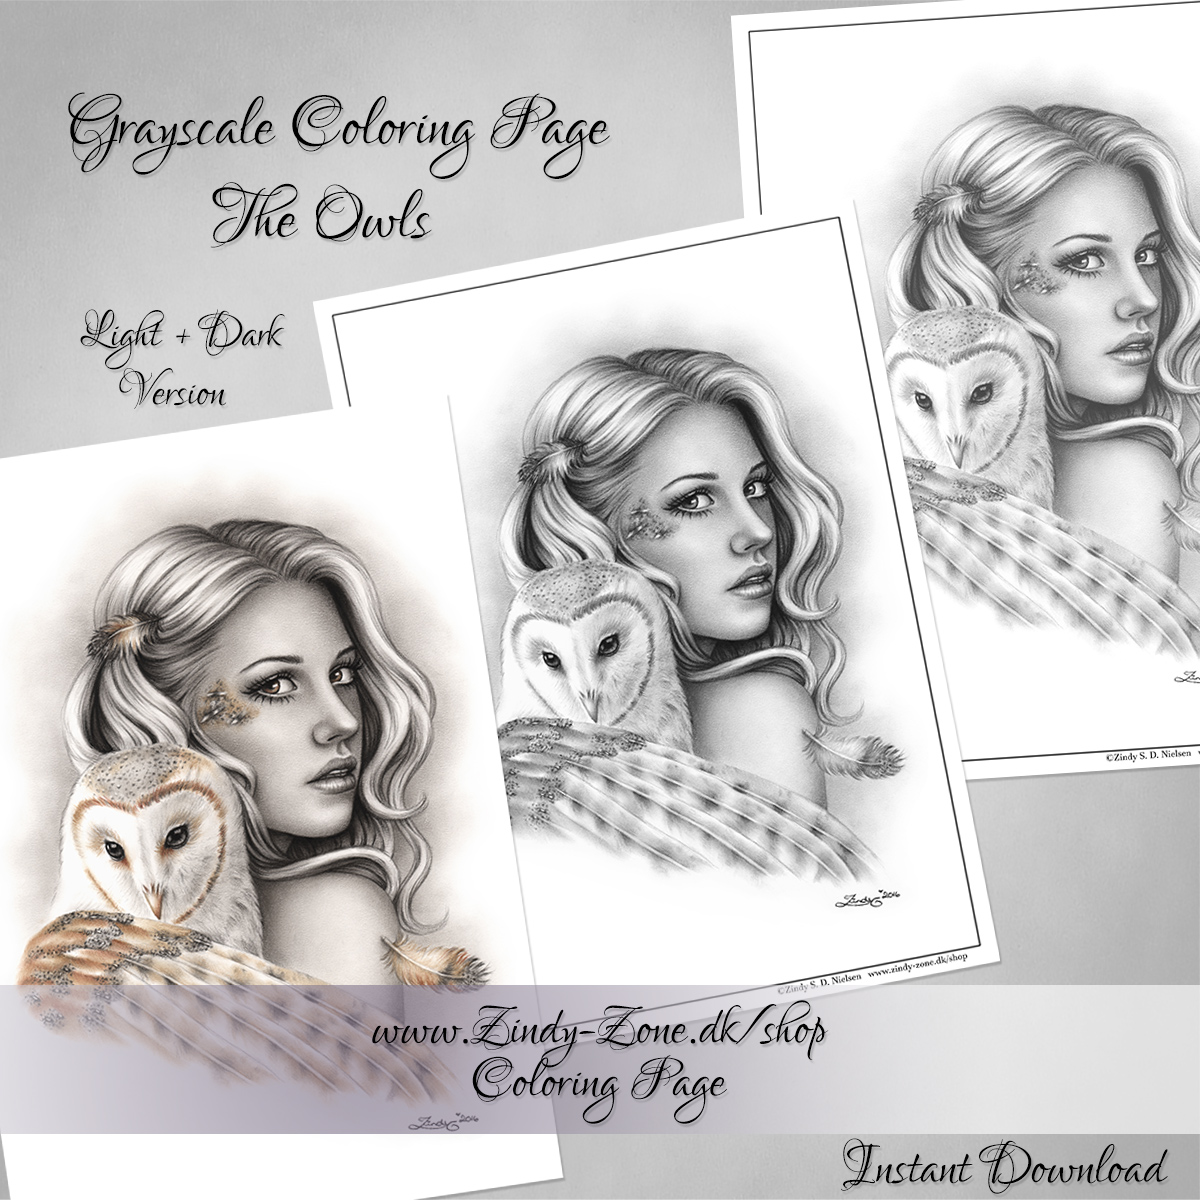 The Owls Coloring Page - Grayscale